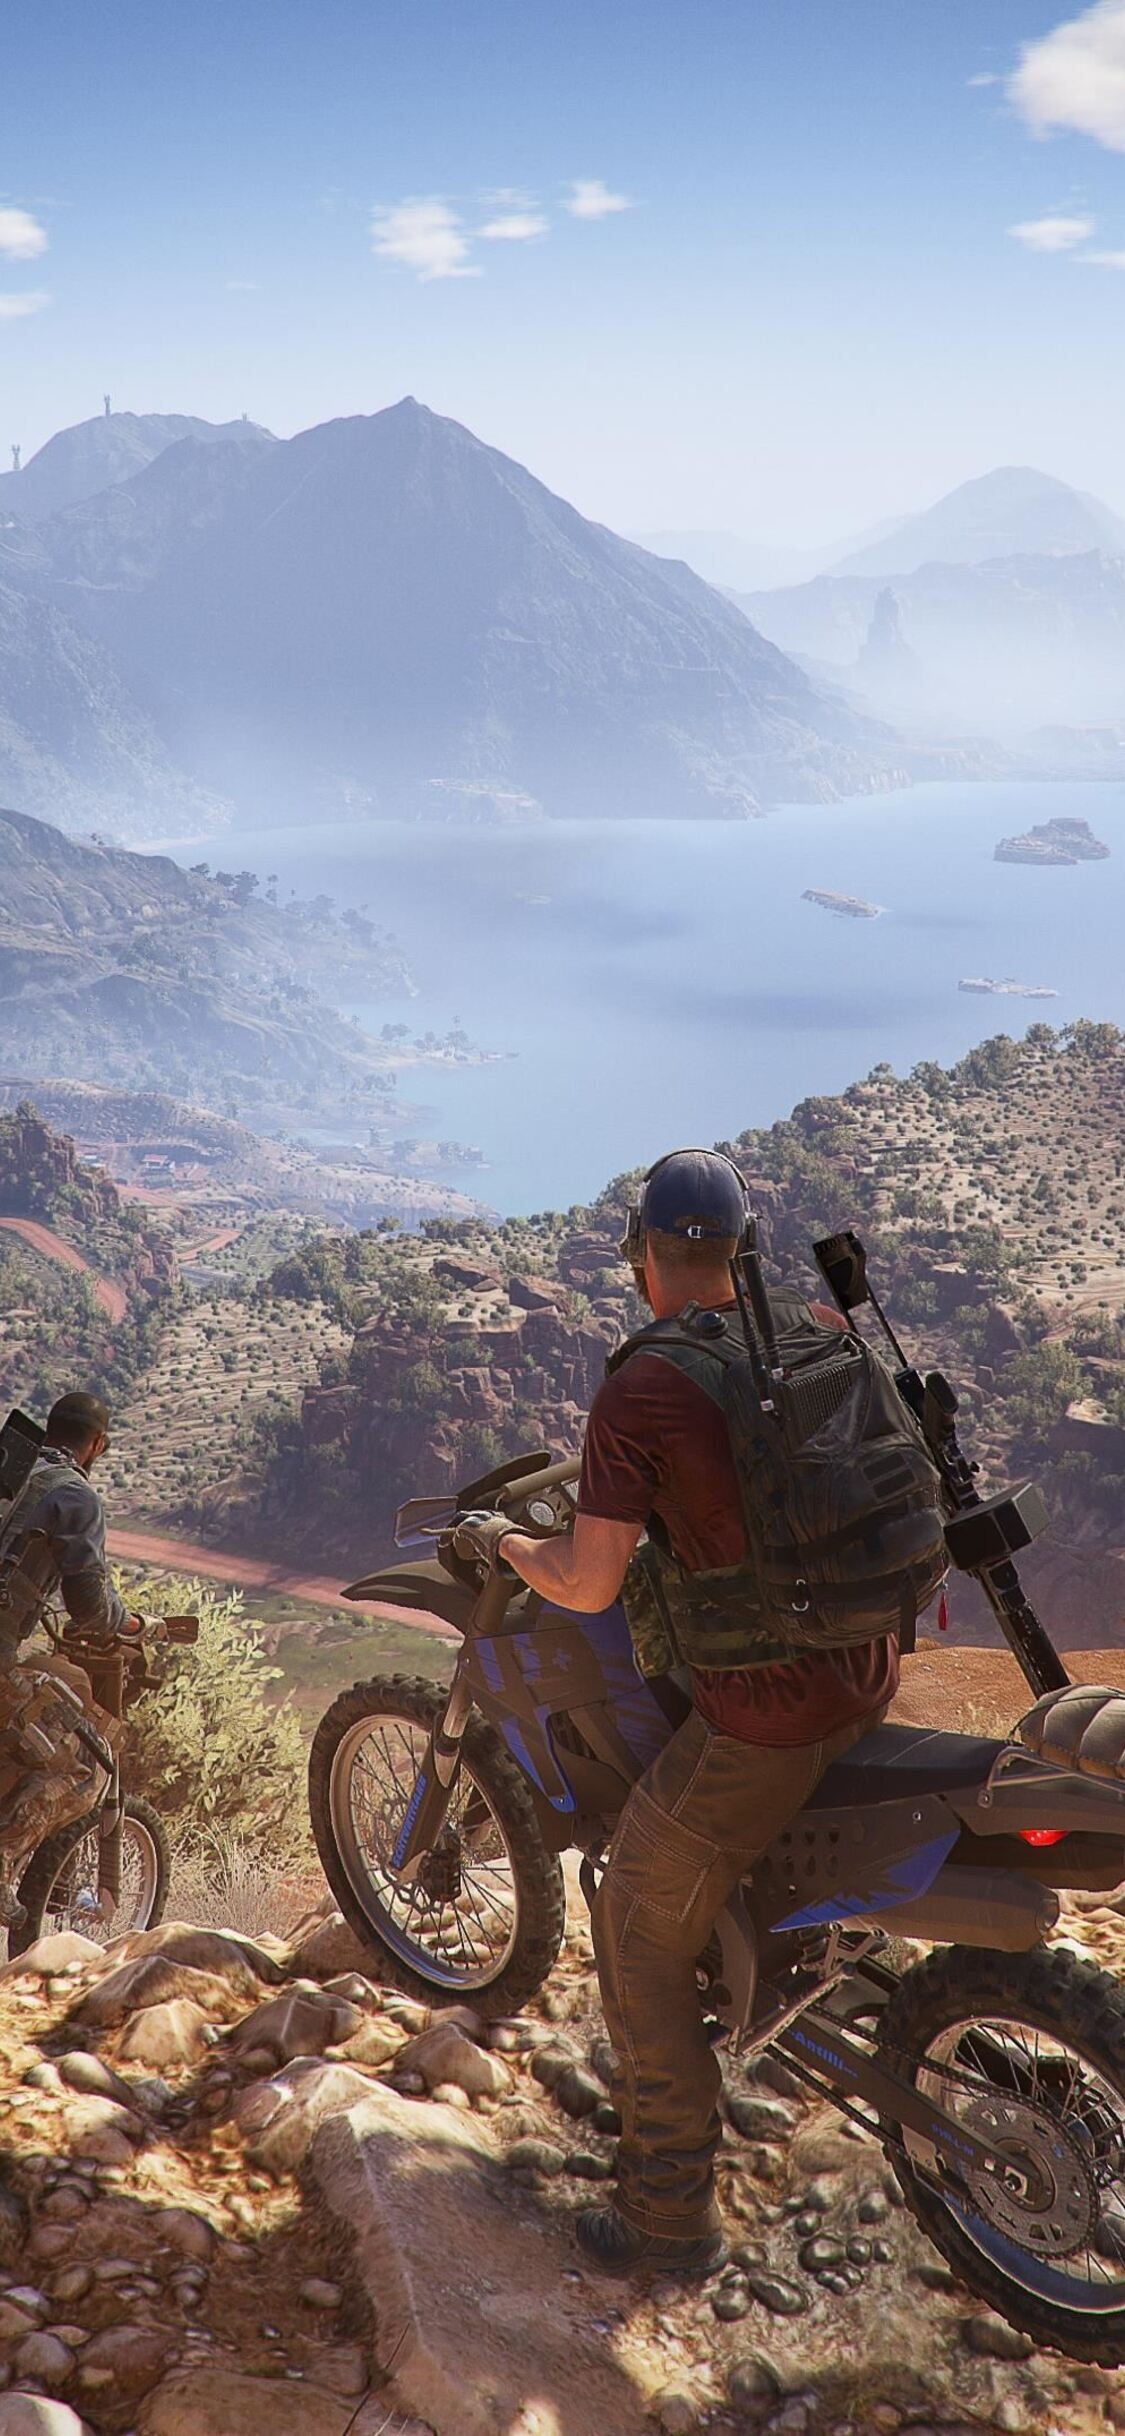 Ghost Recon: Wildlands: Cooperative multiplayer mode, Single-player campaign, Adventure video game. 1130x2440 HD Wallpaper.